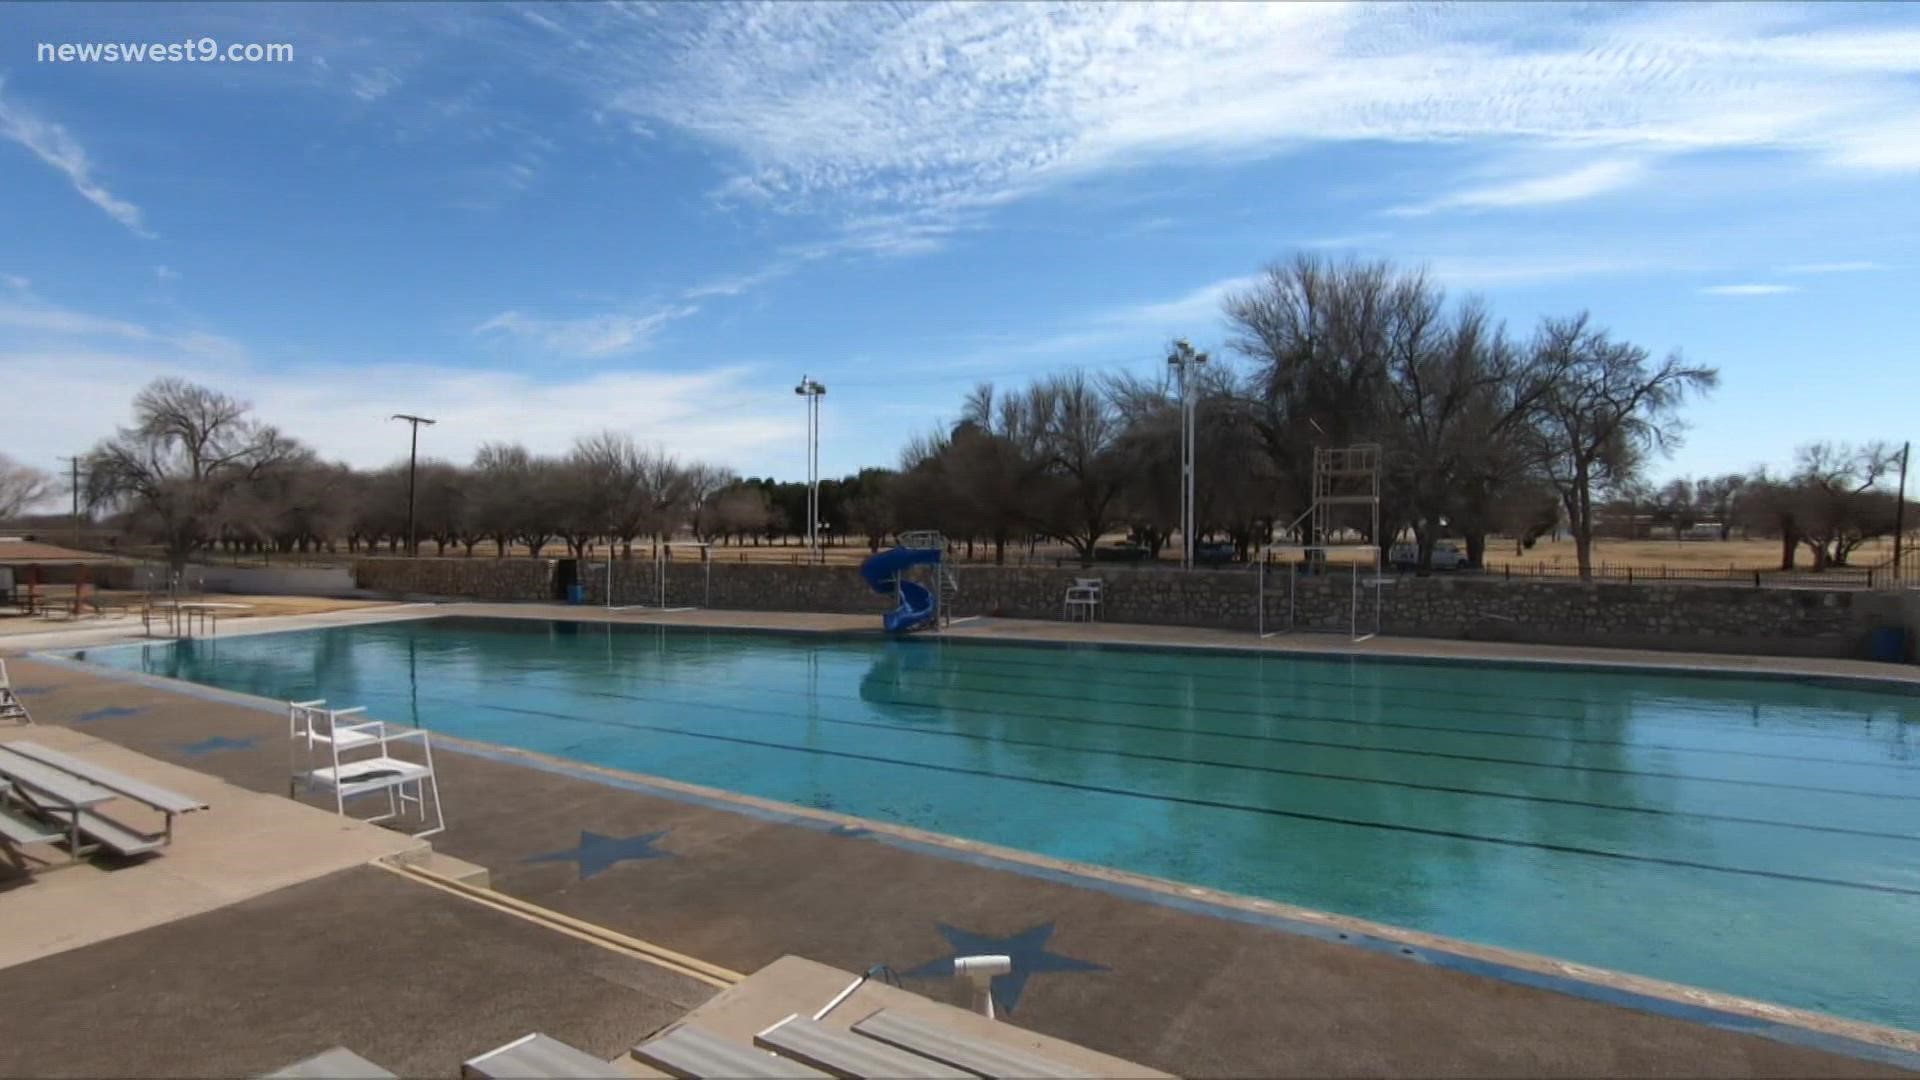 The big question is will Fort Stockton ever get Comanche Springs back? That's when Texas Water Trade comes into play.